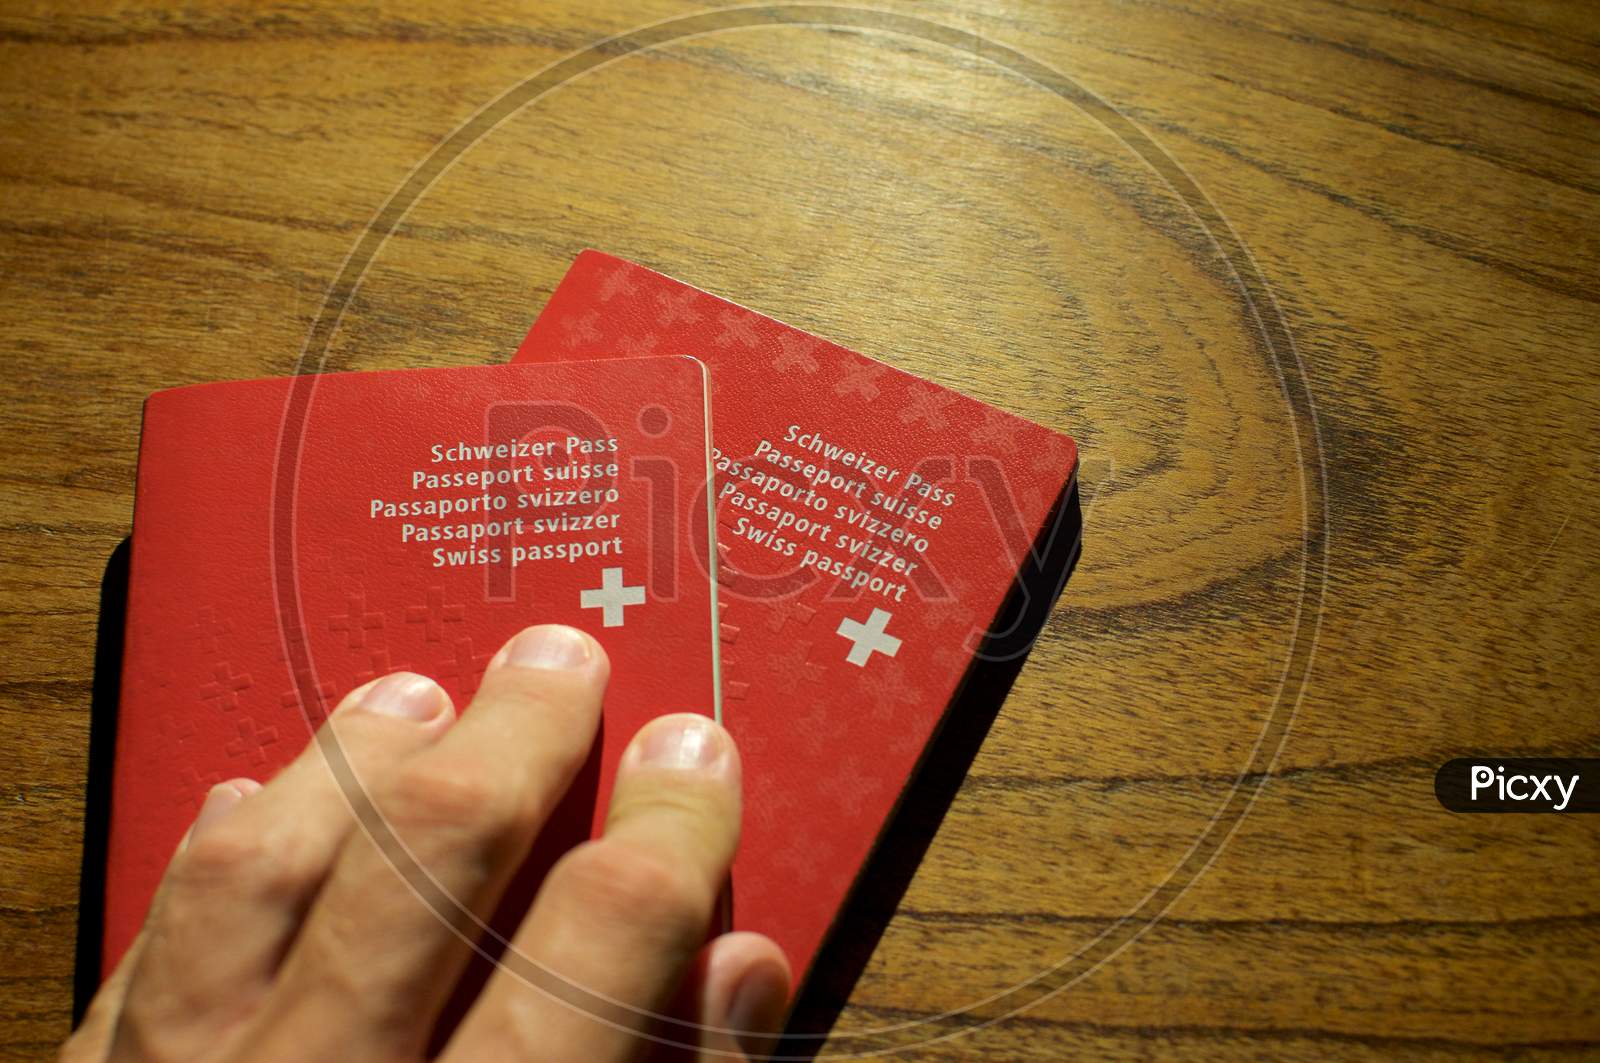 Two Swiss Passport On A Wooden Table